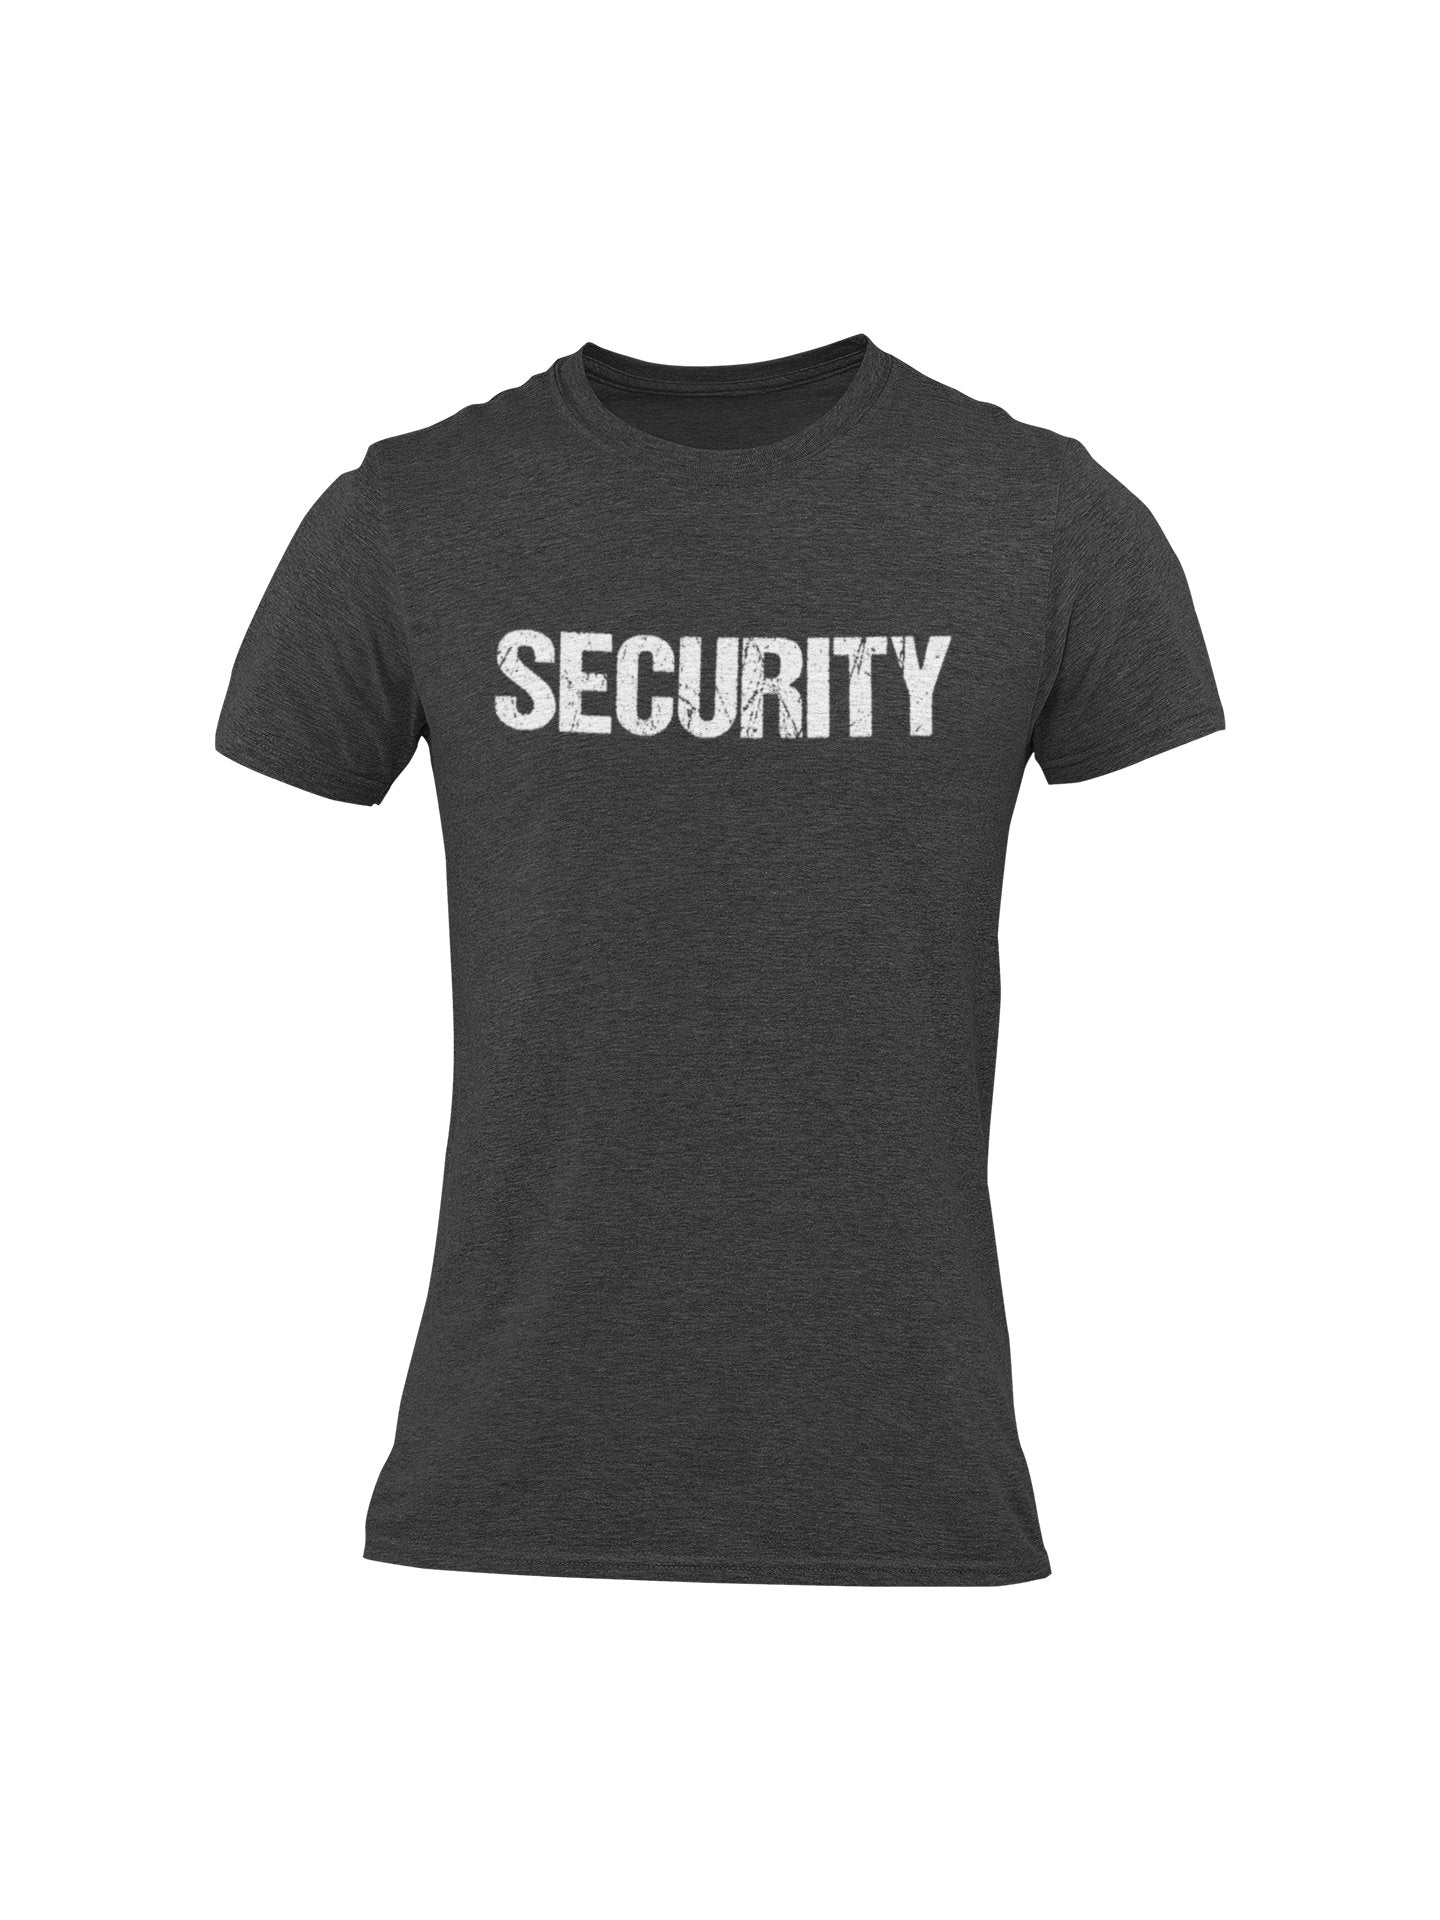 Men's Security Tee (Distressed Front & Back Print, Dark Heather/White)